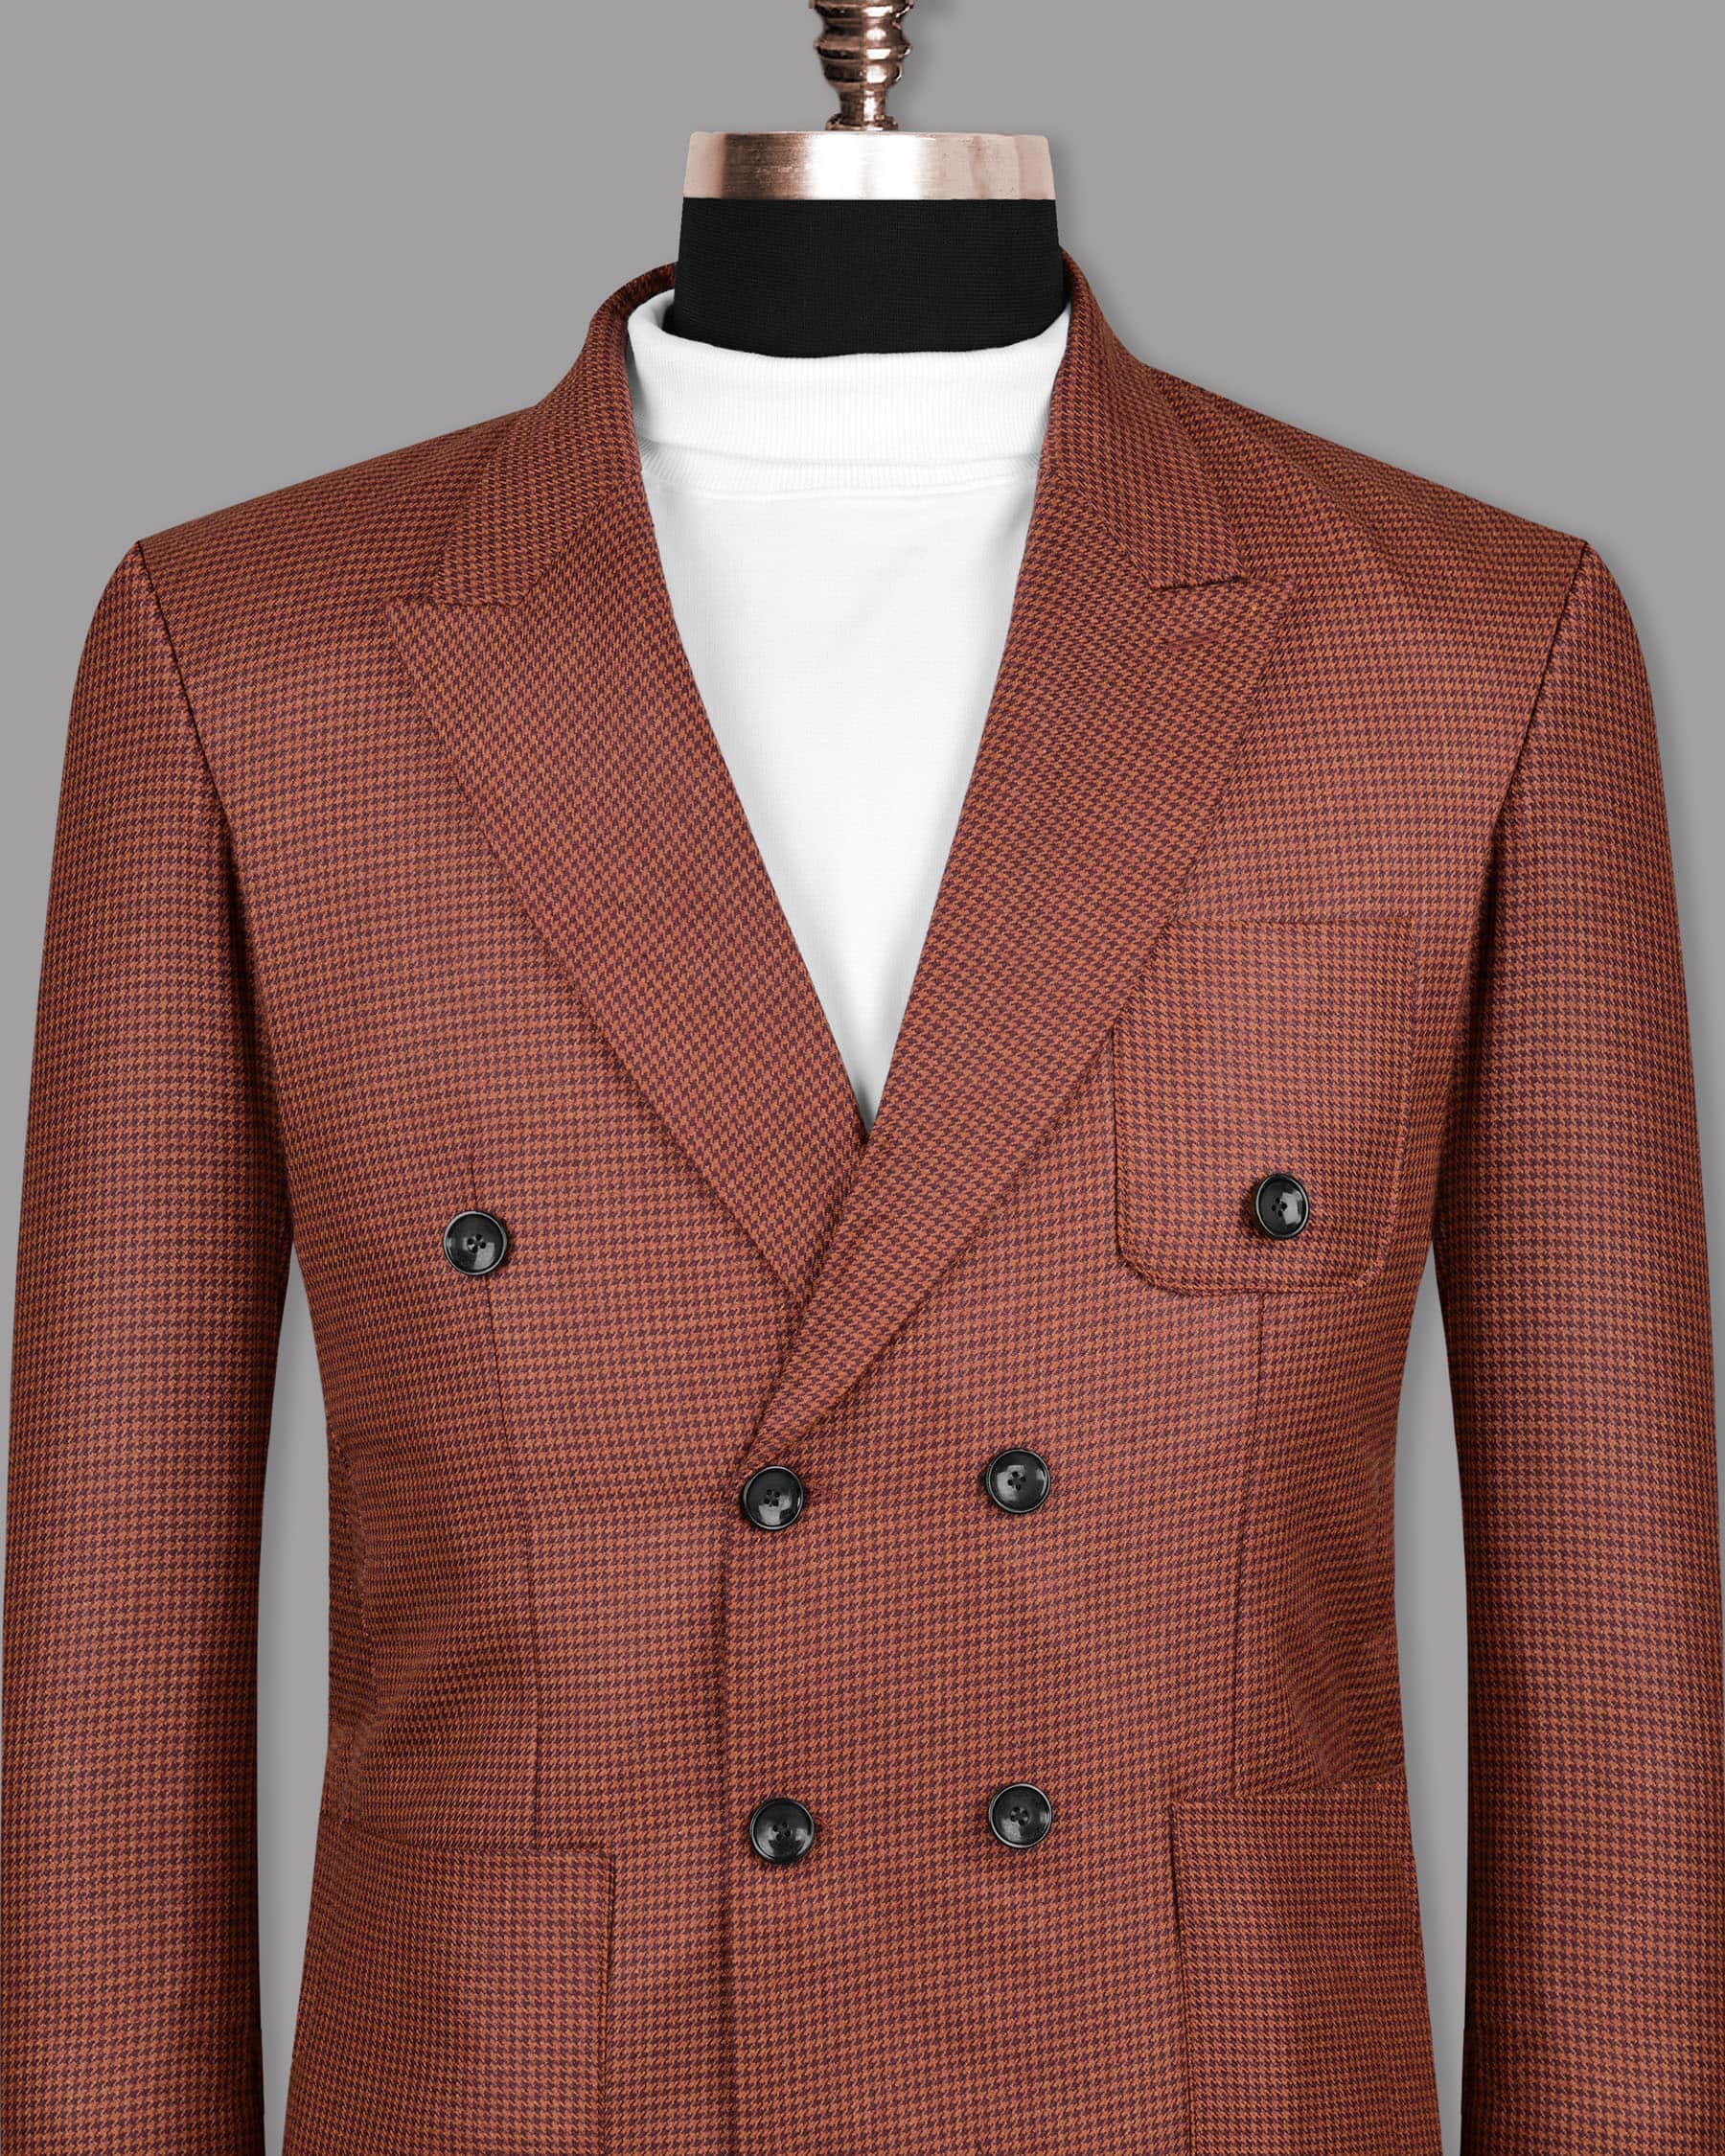 Flame Pea with Purple Houndstooth Double Breasted Sport Blazer BL1090-DB-PP-36, BL1090-DB-PP-38, BL1090-DB-PP-40, BL1090-DB-PP-42, BL1090-DB-PP-46, BL1090-DB-PP-52, BL1090-DB-PP-54, BL1090-DB-PP-56, BL1090-DB-PP-58, BL1090-DB-PP-60, BL1090-DB-PP-44, BL1090-DB-PP-48, BL1090-DB-PP-50